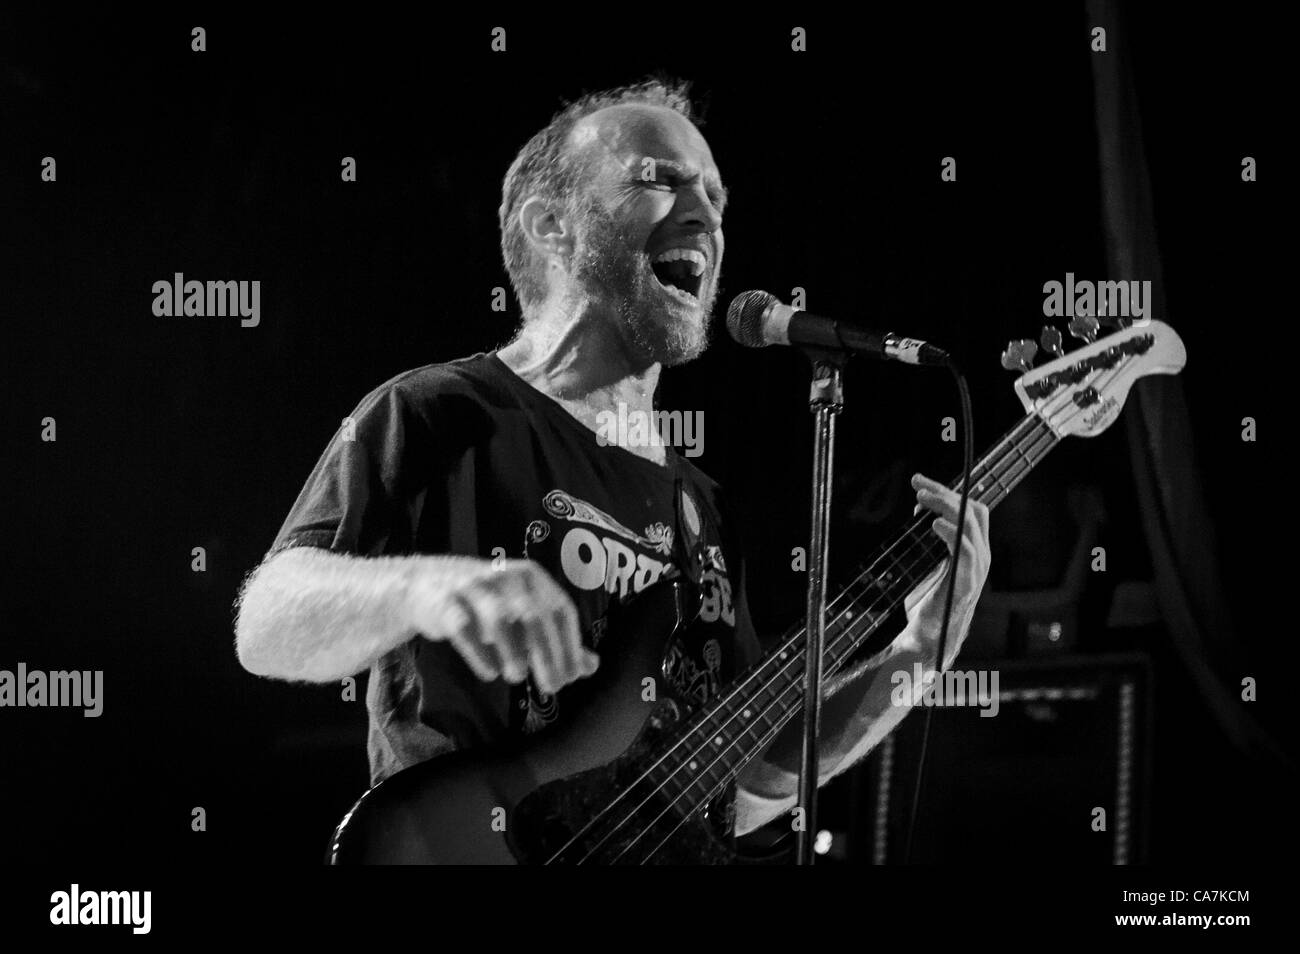 June 21, 2012 - Toronto, Ontario, Canada - American Crossover band Corrosion of Conformity performed live show at The Opera House in Toronto. In picture - MIKE DEAN (Credit Image: © Igor Vidyashev/ZUMAPRESS.com) Stock Photo